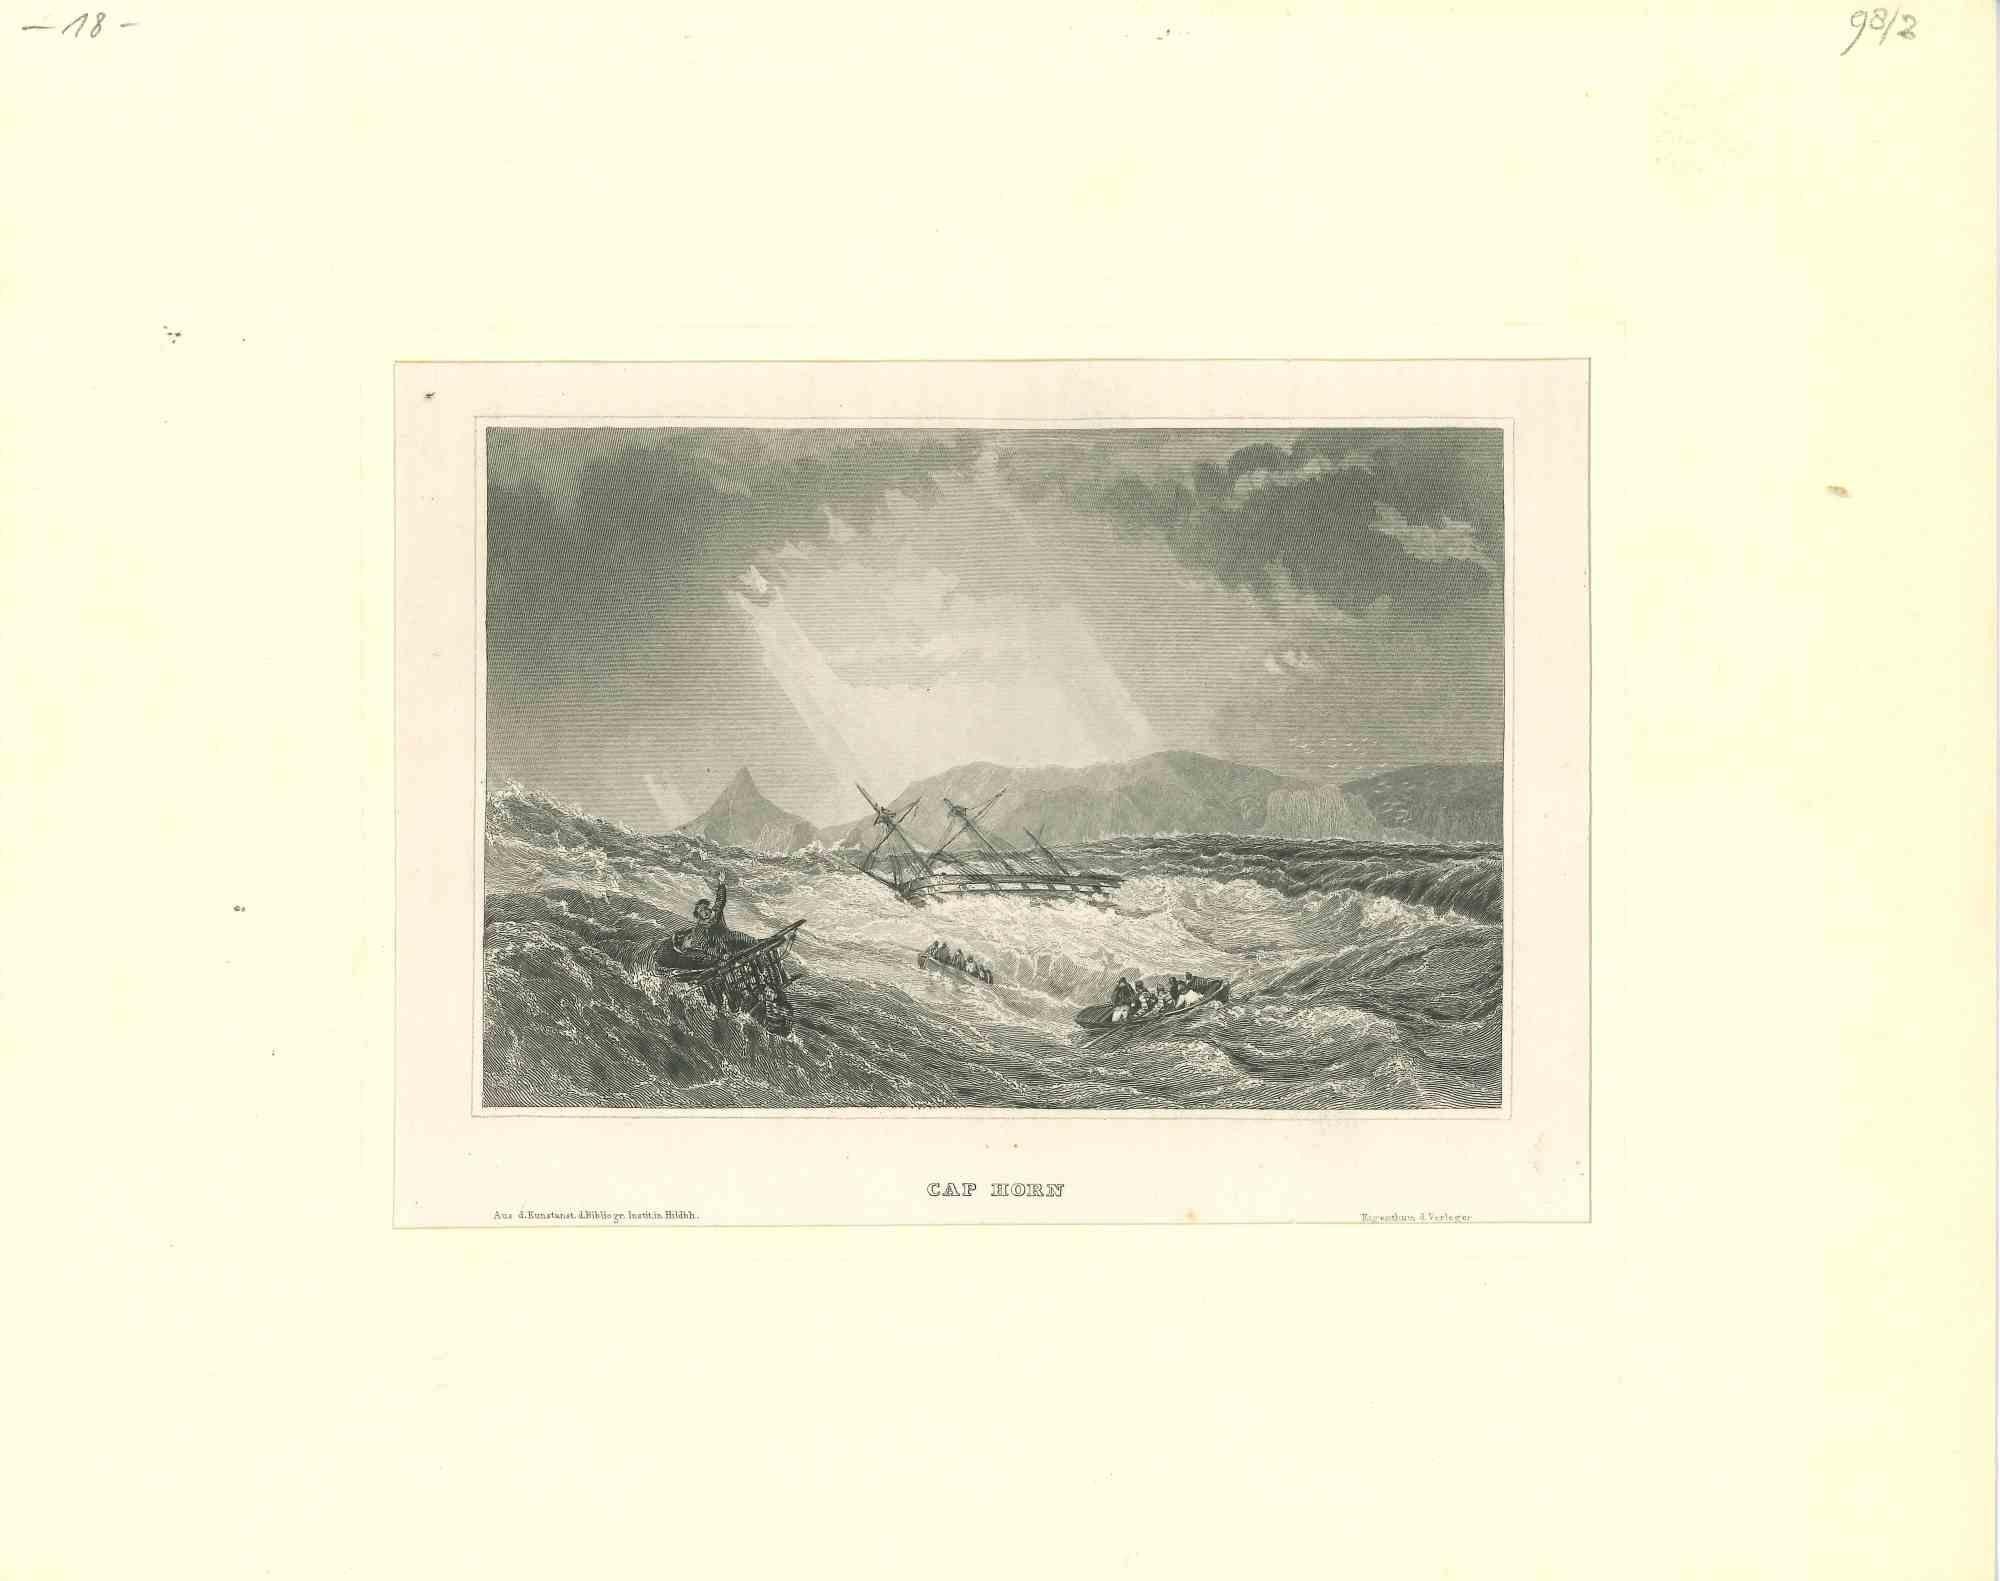 Unknown Figurative Print - Ancient View of Cap Horn - Original Lithograph - Early 19th Century